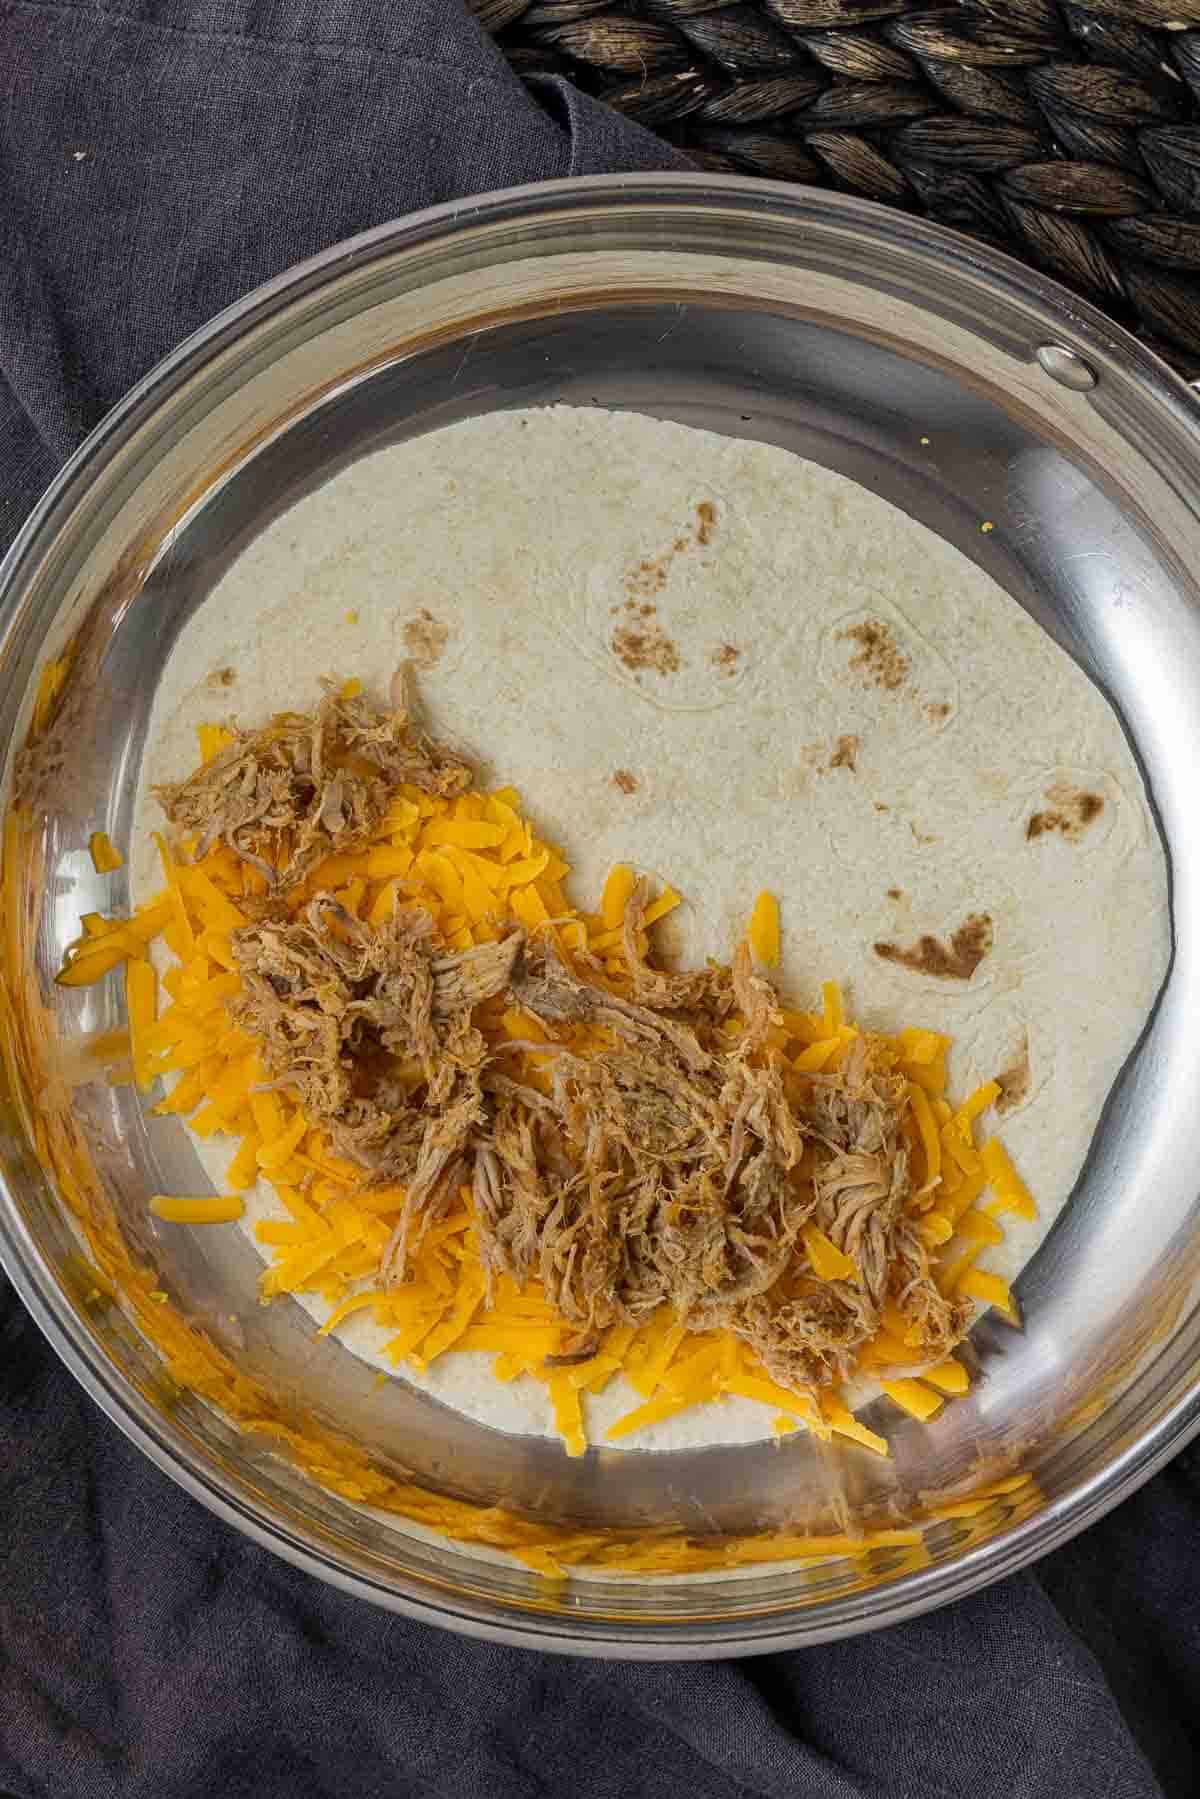 How to make Pulled Pork Quesadillas